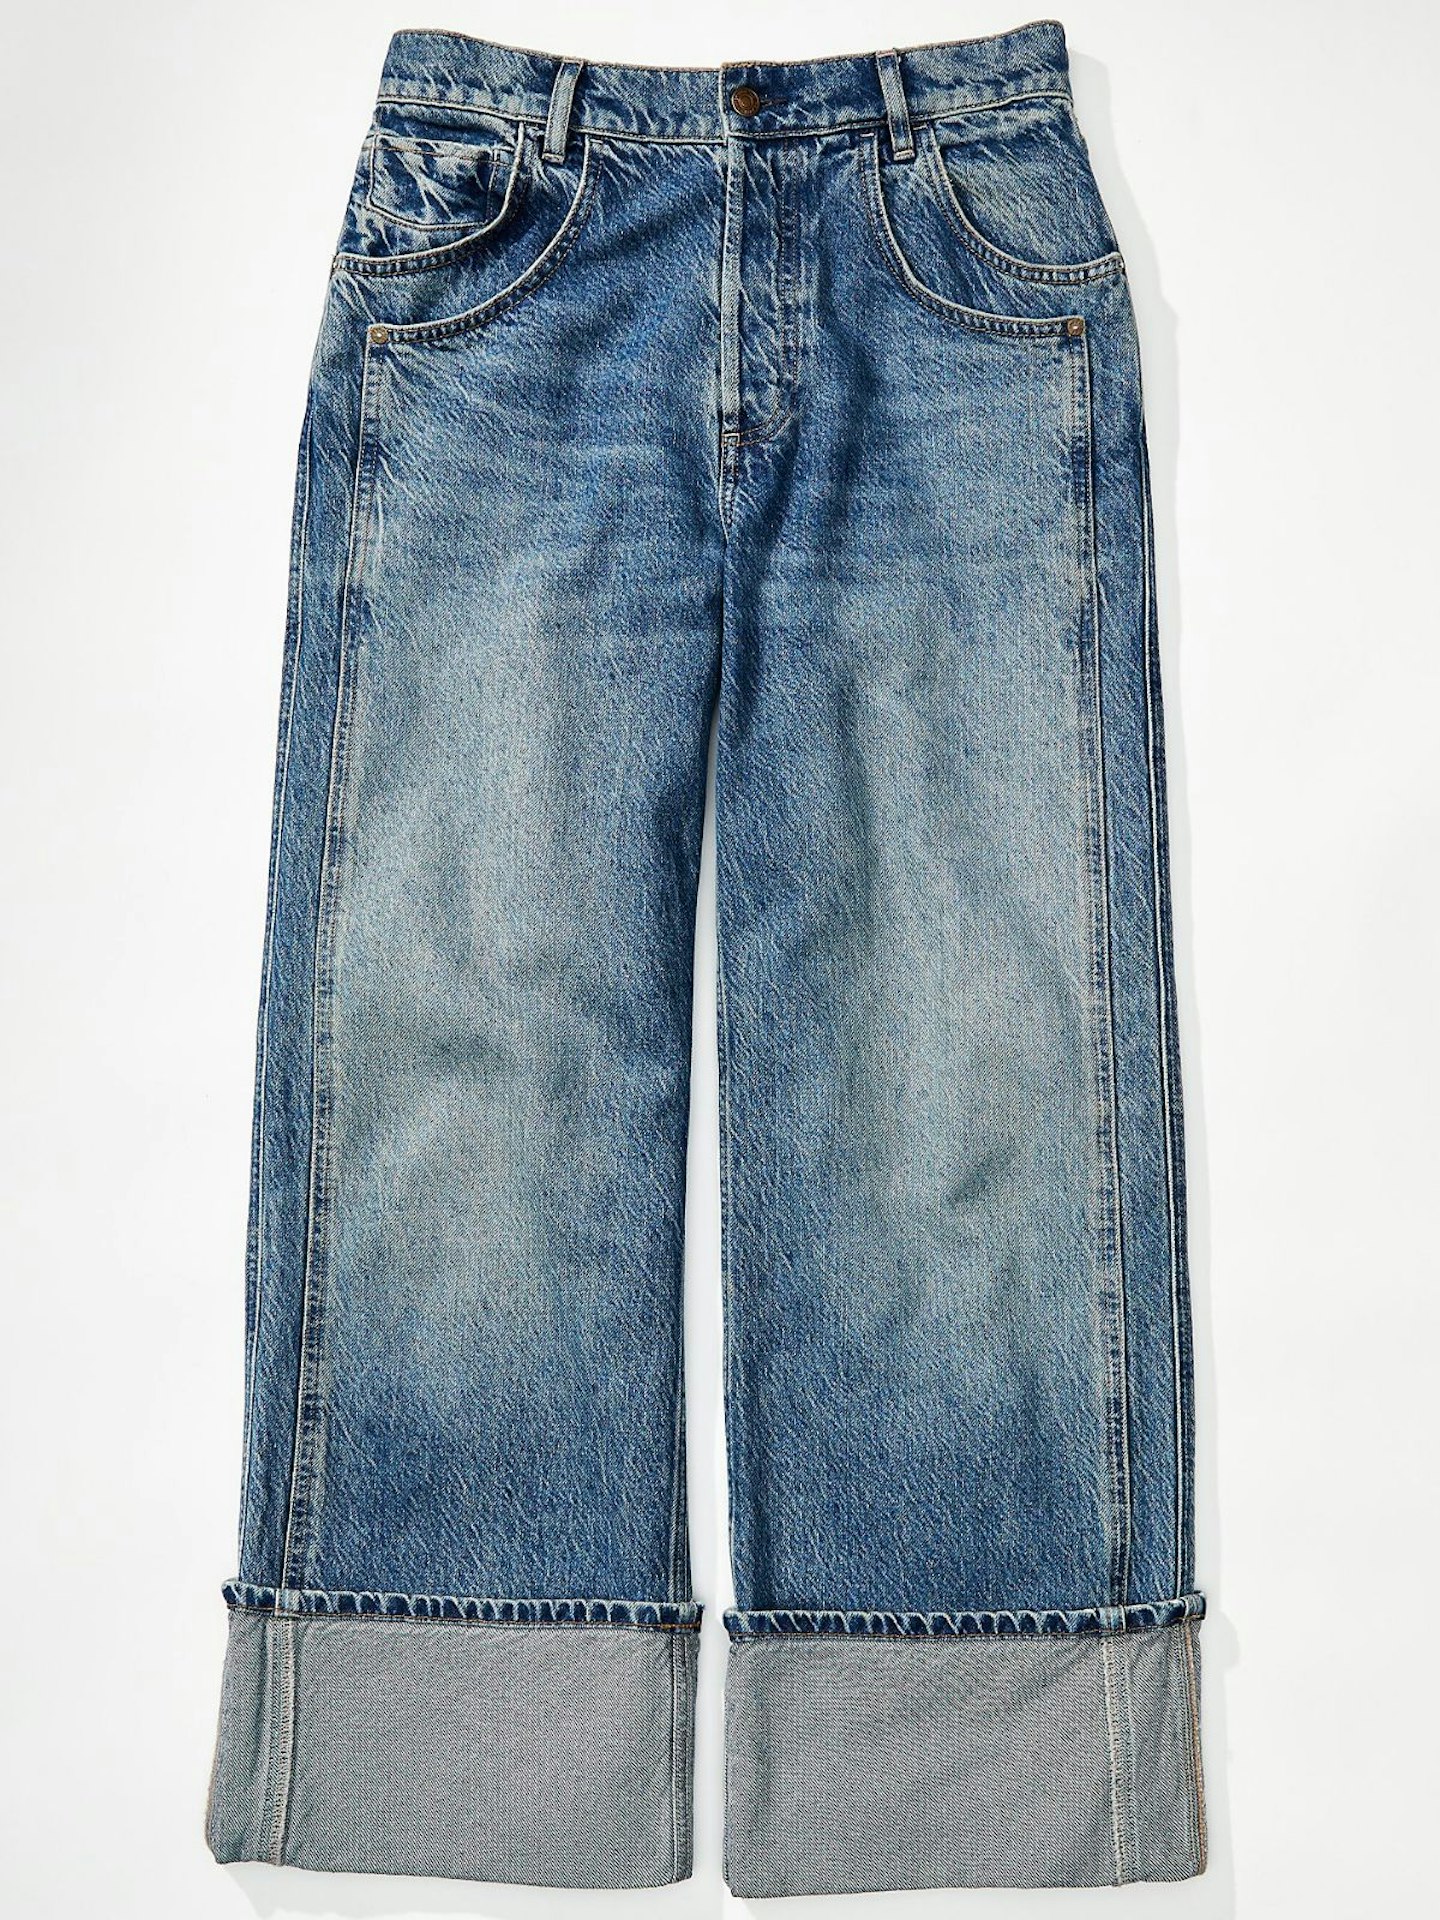 We Are The Free Final Countdown Cuffed Low-Rise Jeans